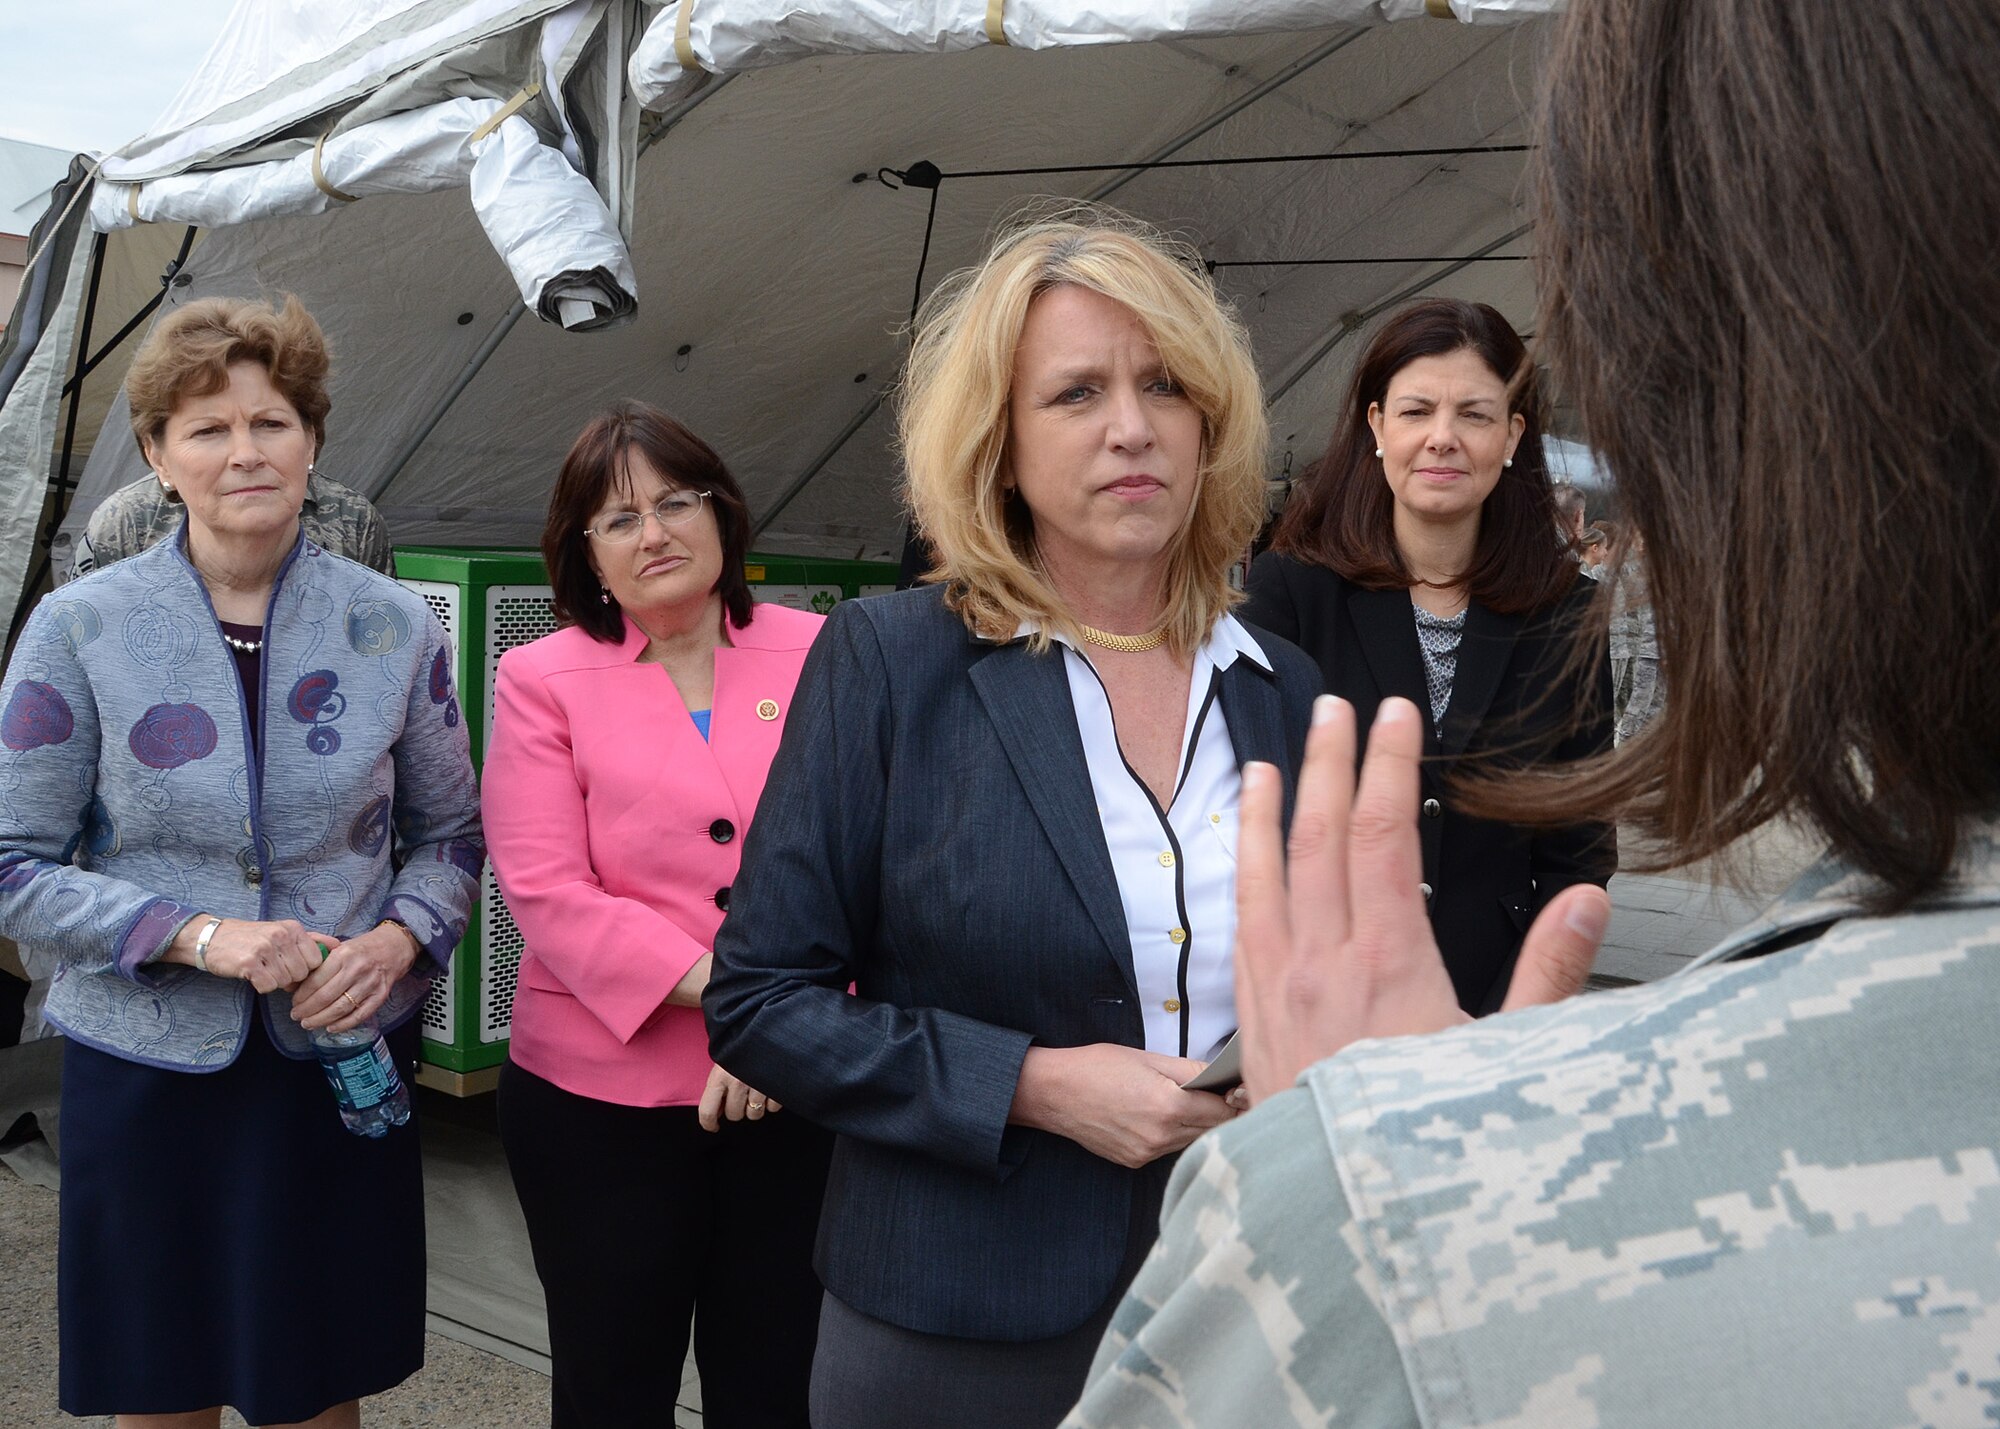 Secretary of the Air Force Deborah Lee James and several state senators listen to Capt. Tori Scearbo May, 2, 2014, as she discusses part of the mission at Pease Air National Guard Base, N.H. Scearbo is a member of the New Hampshire Air National Guard as a 157th Medical Group nurse. (U.S. Air Force photo/Tech. Sgt. Mark Wyatt)